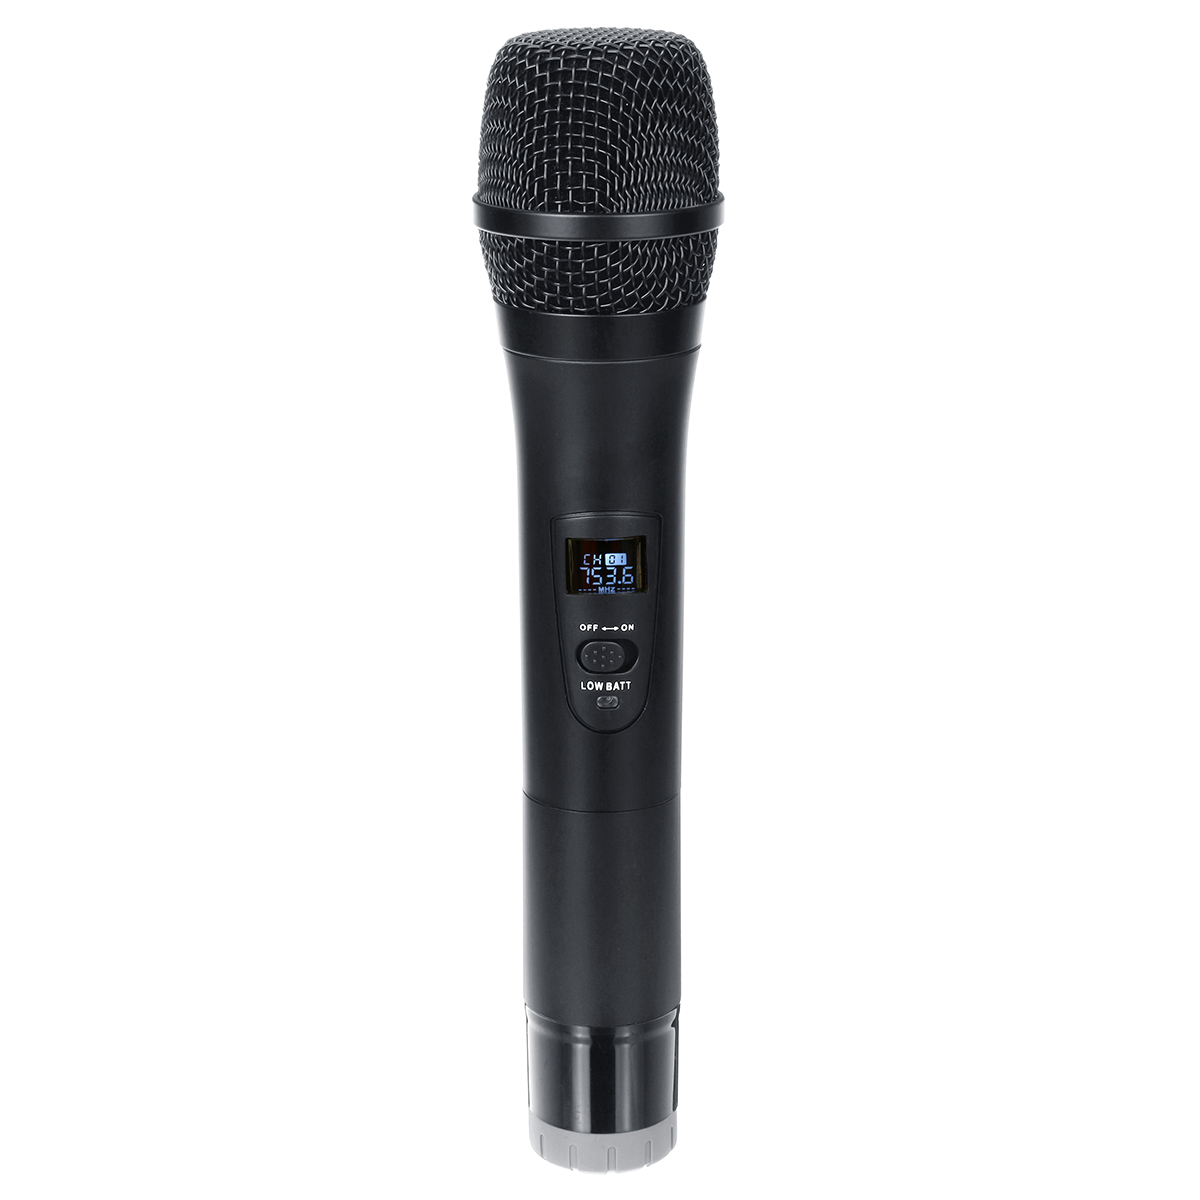 Find Professional UHF Double Wireless Handheld Karaoke Microphone with 3 5mm Receiver for Sale on Gipsybee.com with cryptocurrencies